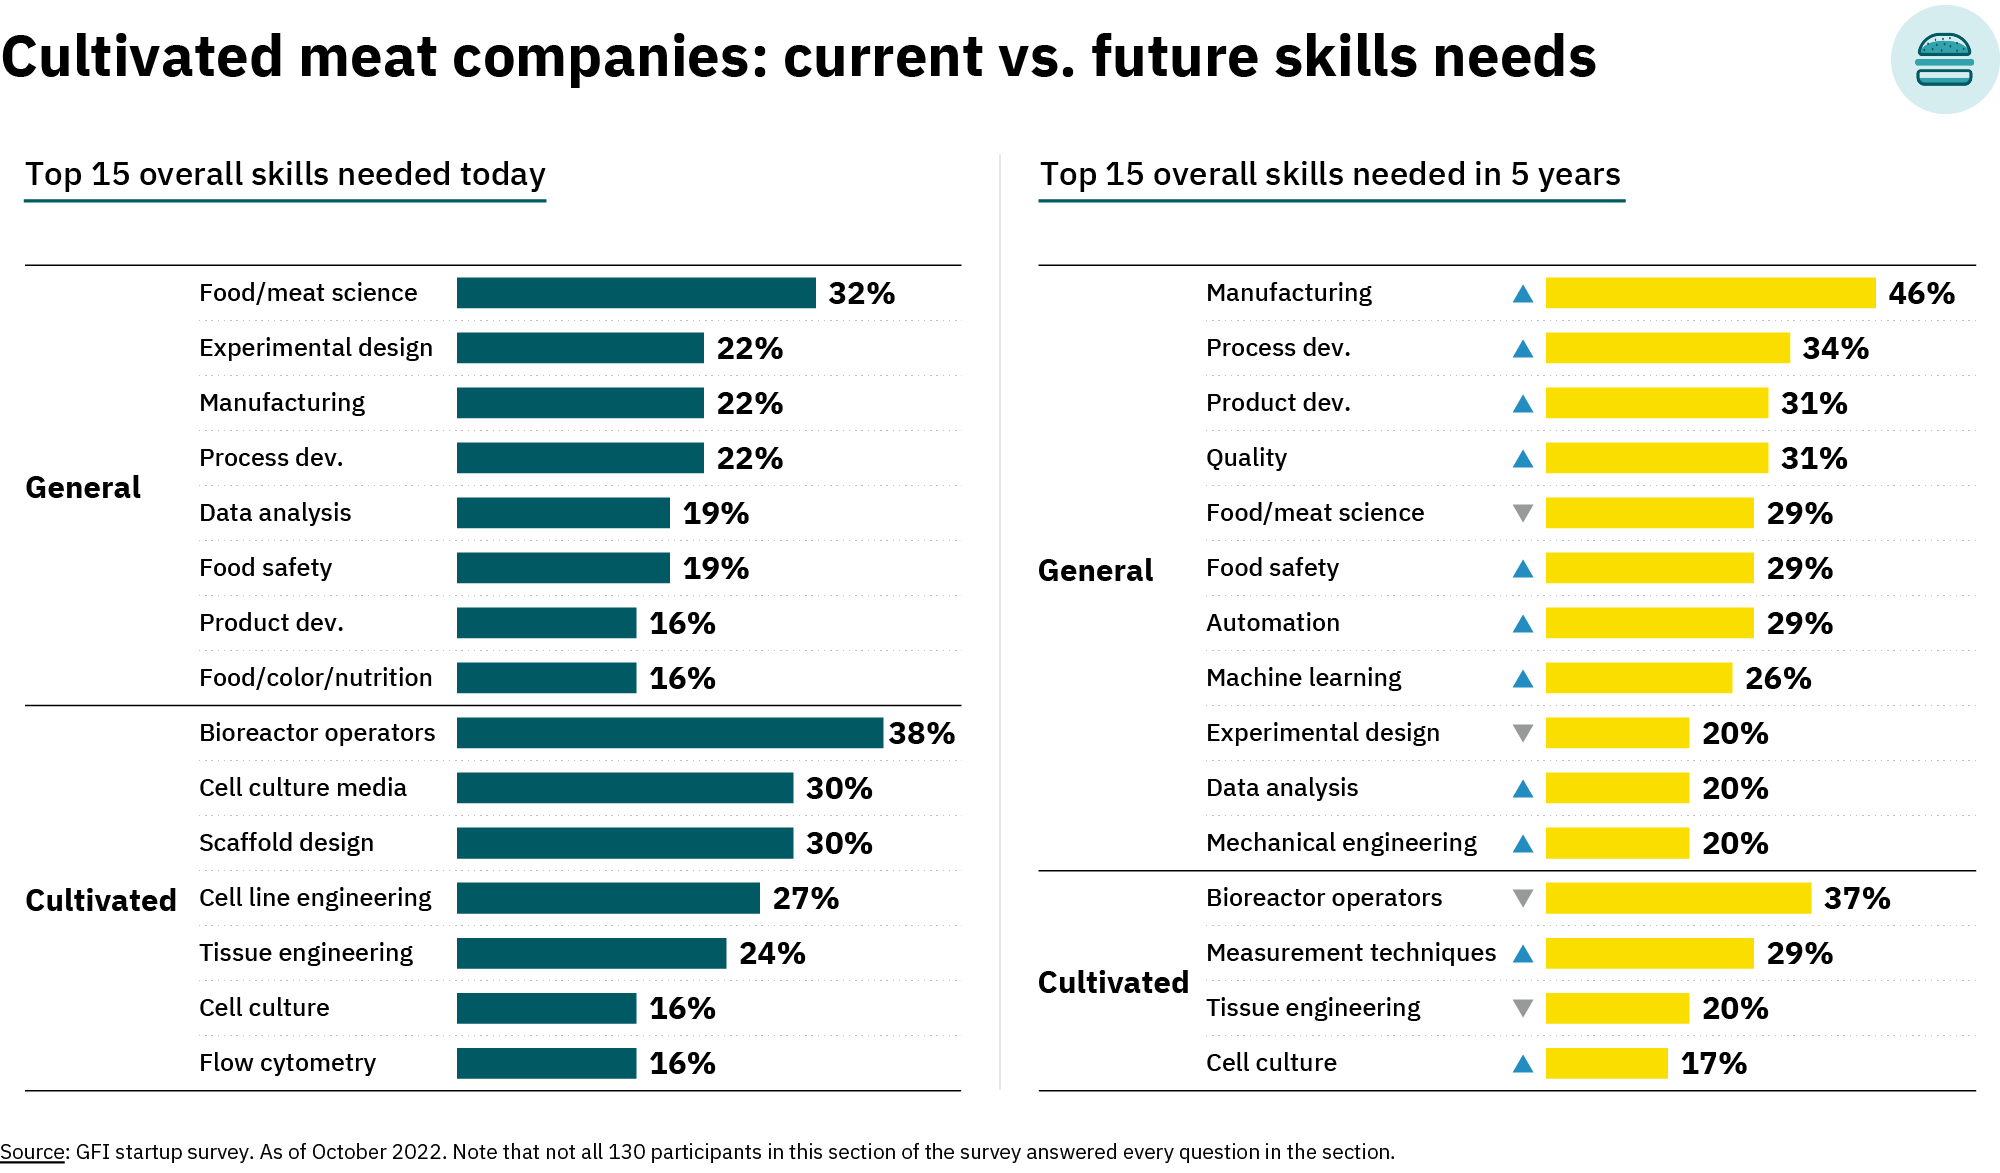 Cultivated meat companies: current vs. Future skills needs; top 15 overall skills needed today - general: food/meat science 32%, experimental design 22%, manufacturing 21%, process dev. 22%, data analysis 19%, food safety 19%, product dev. 16%, food/color/nutrition 16%; cultivated: bioreactor operators 38%, cell culture media 30%, scaffold design 30%, cell line engineering 27%,  tissue engineering 24%, cell culture 16%, flow cytometry 16%; top 15 overall skills needed in 5 years - general: manufacturing 46%, process dev. 34%, product dev 31%, quality 31%, food/meat science 29%, automation 29%, machine learning 26%, experimental design 20%, data science/analysis 20%, mechanical engineering 20%; cultivated: bioreactor operators 37%, measurement techniques 29%, tissue engineering 20%, cell culture 17%